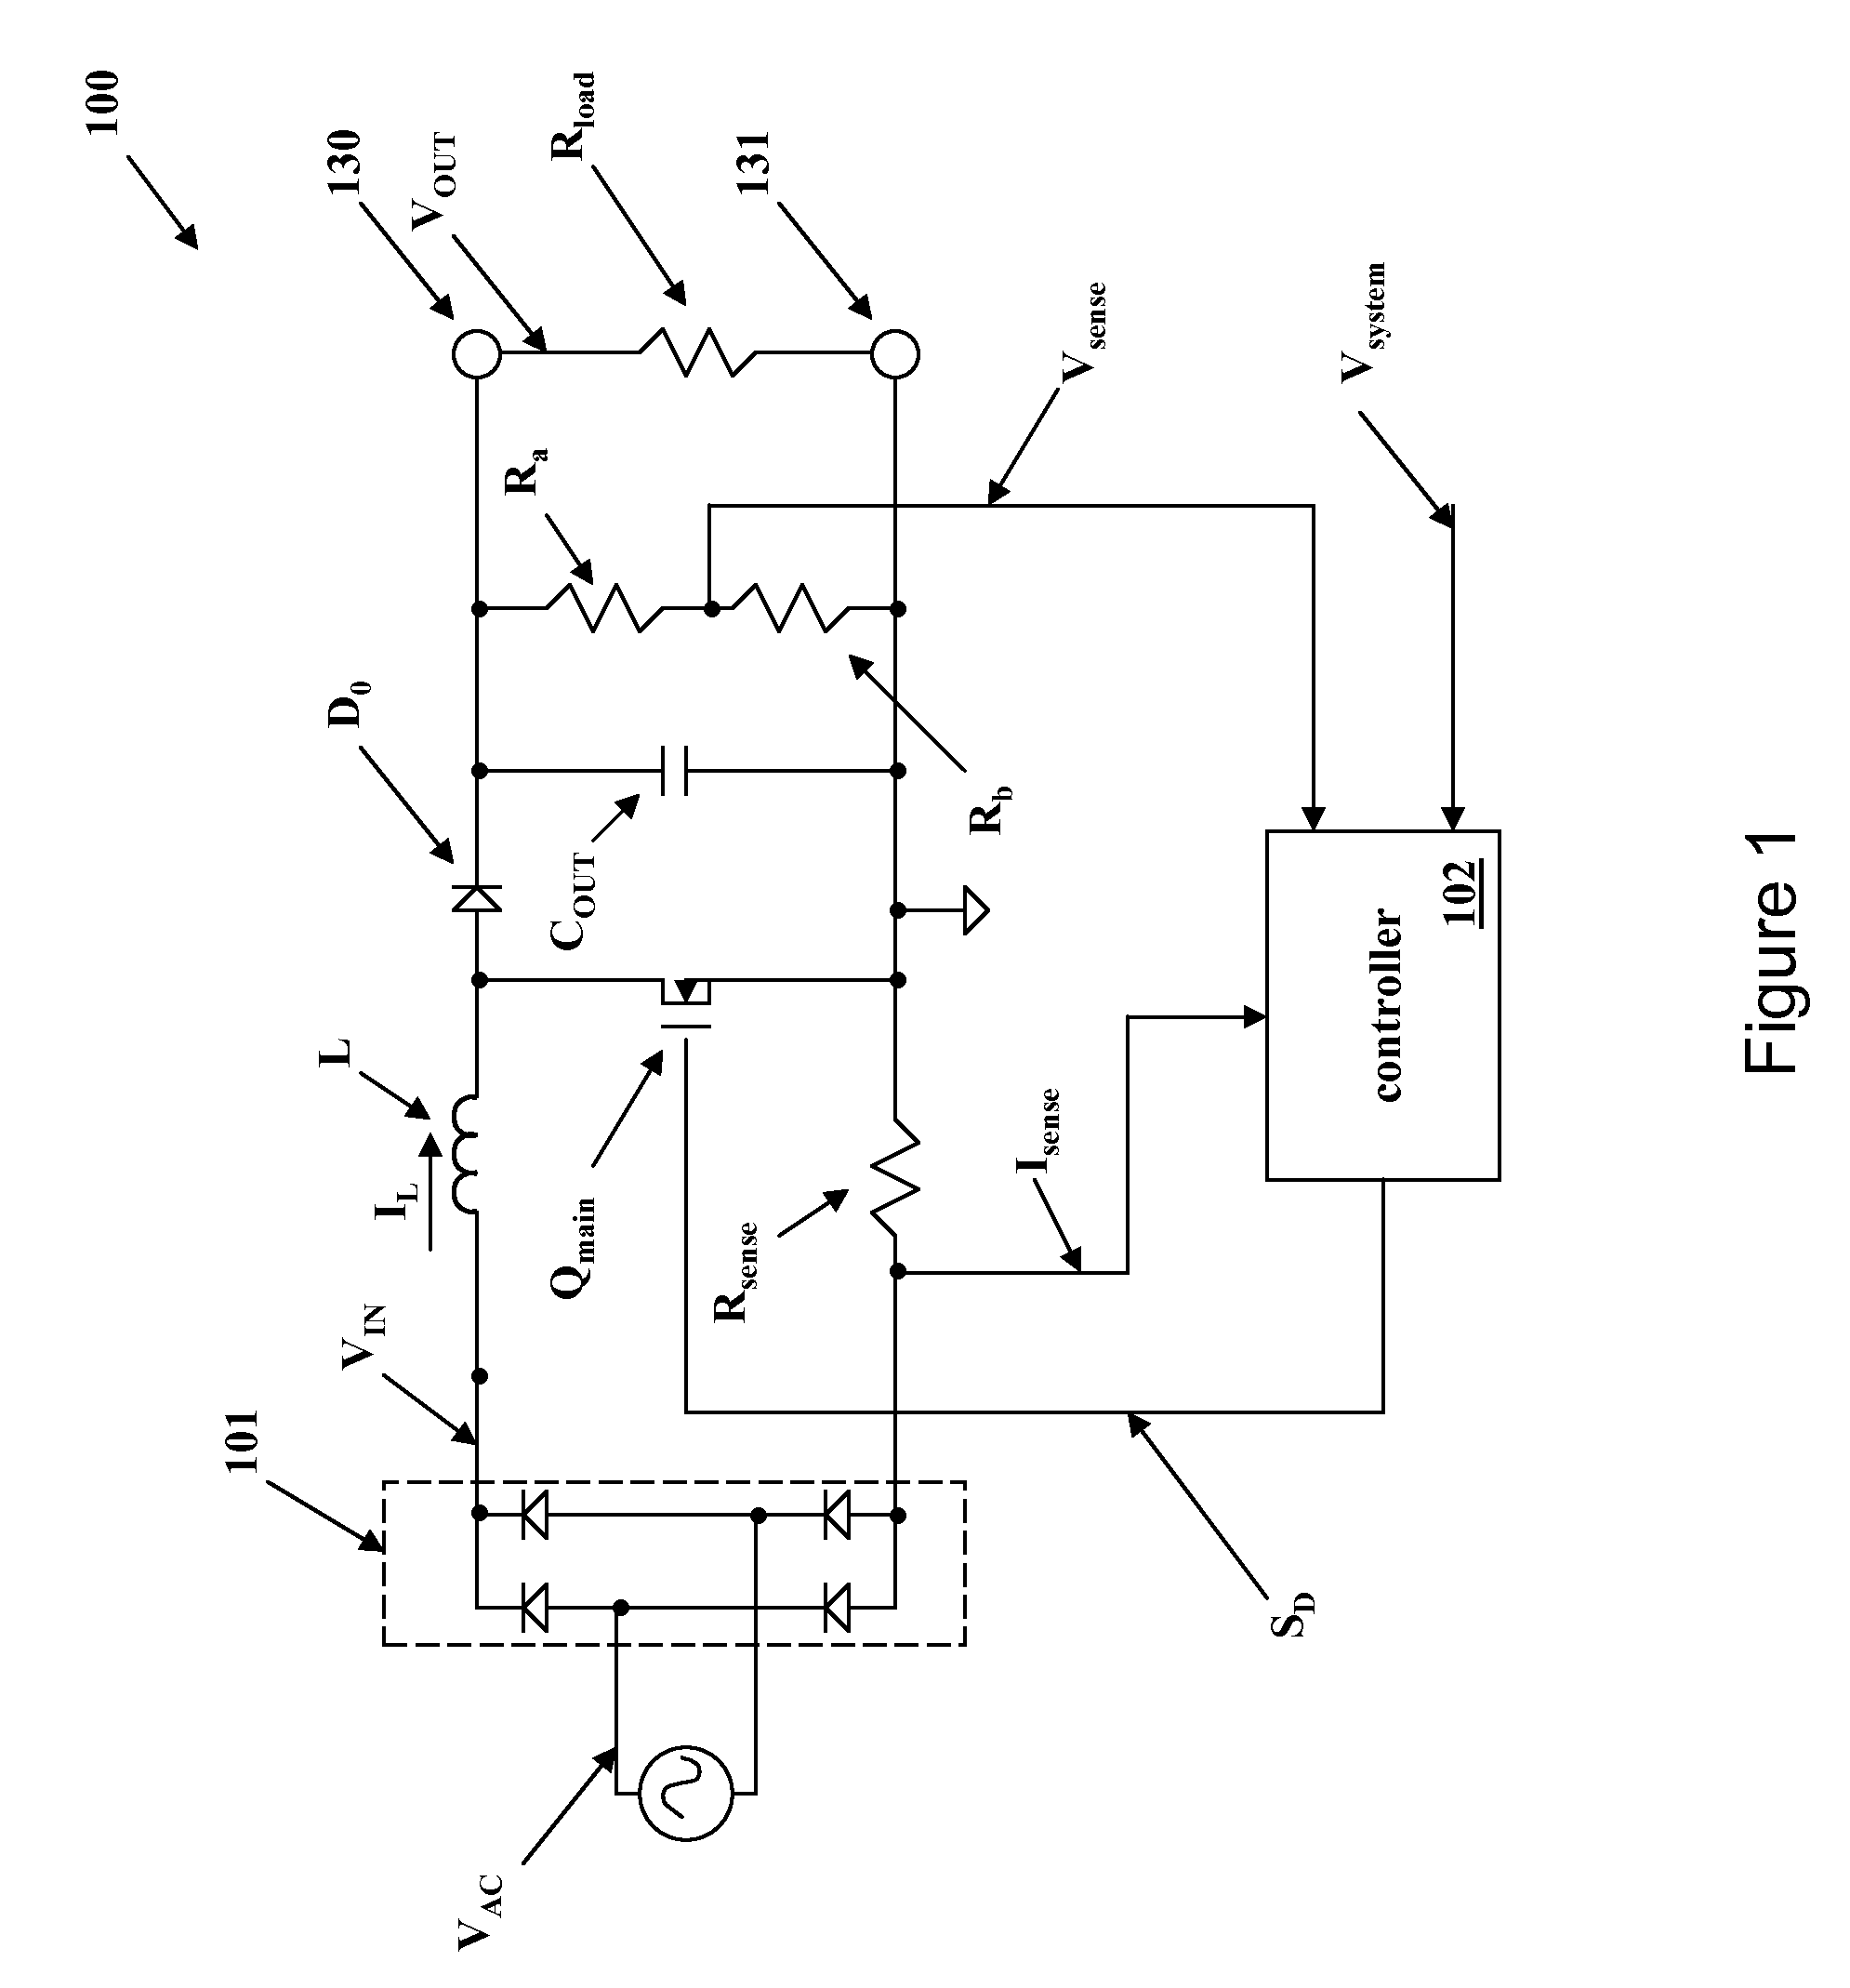 Novel Utilization of a Multifunctional Pin Combining Voltage Sensing and Zero Current Detection to Control a Switched-Mode Power Converter